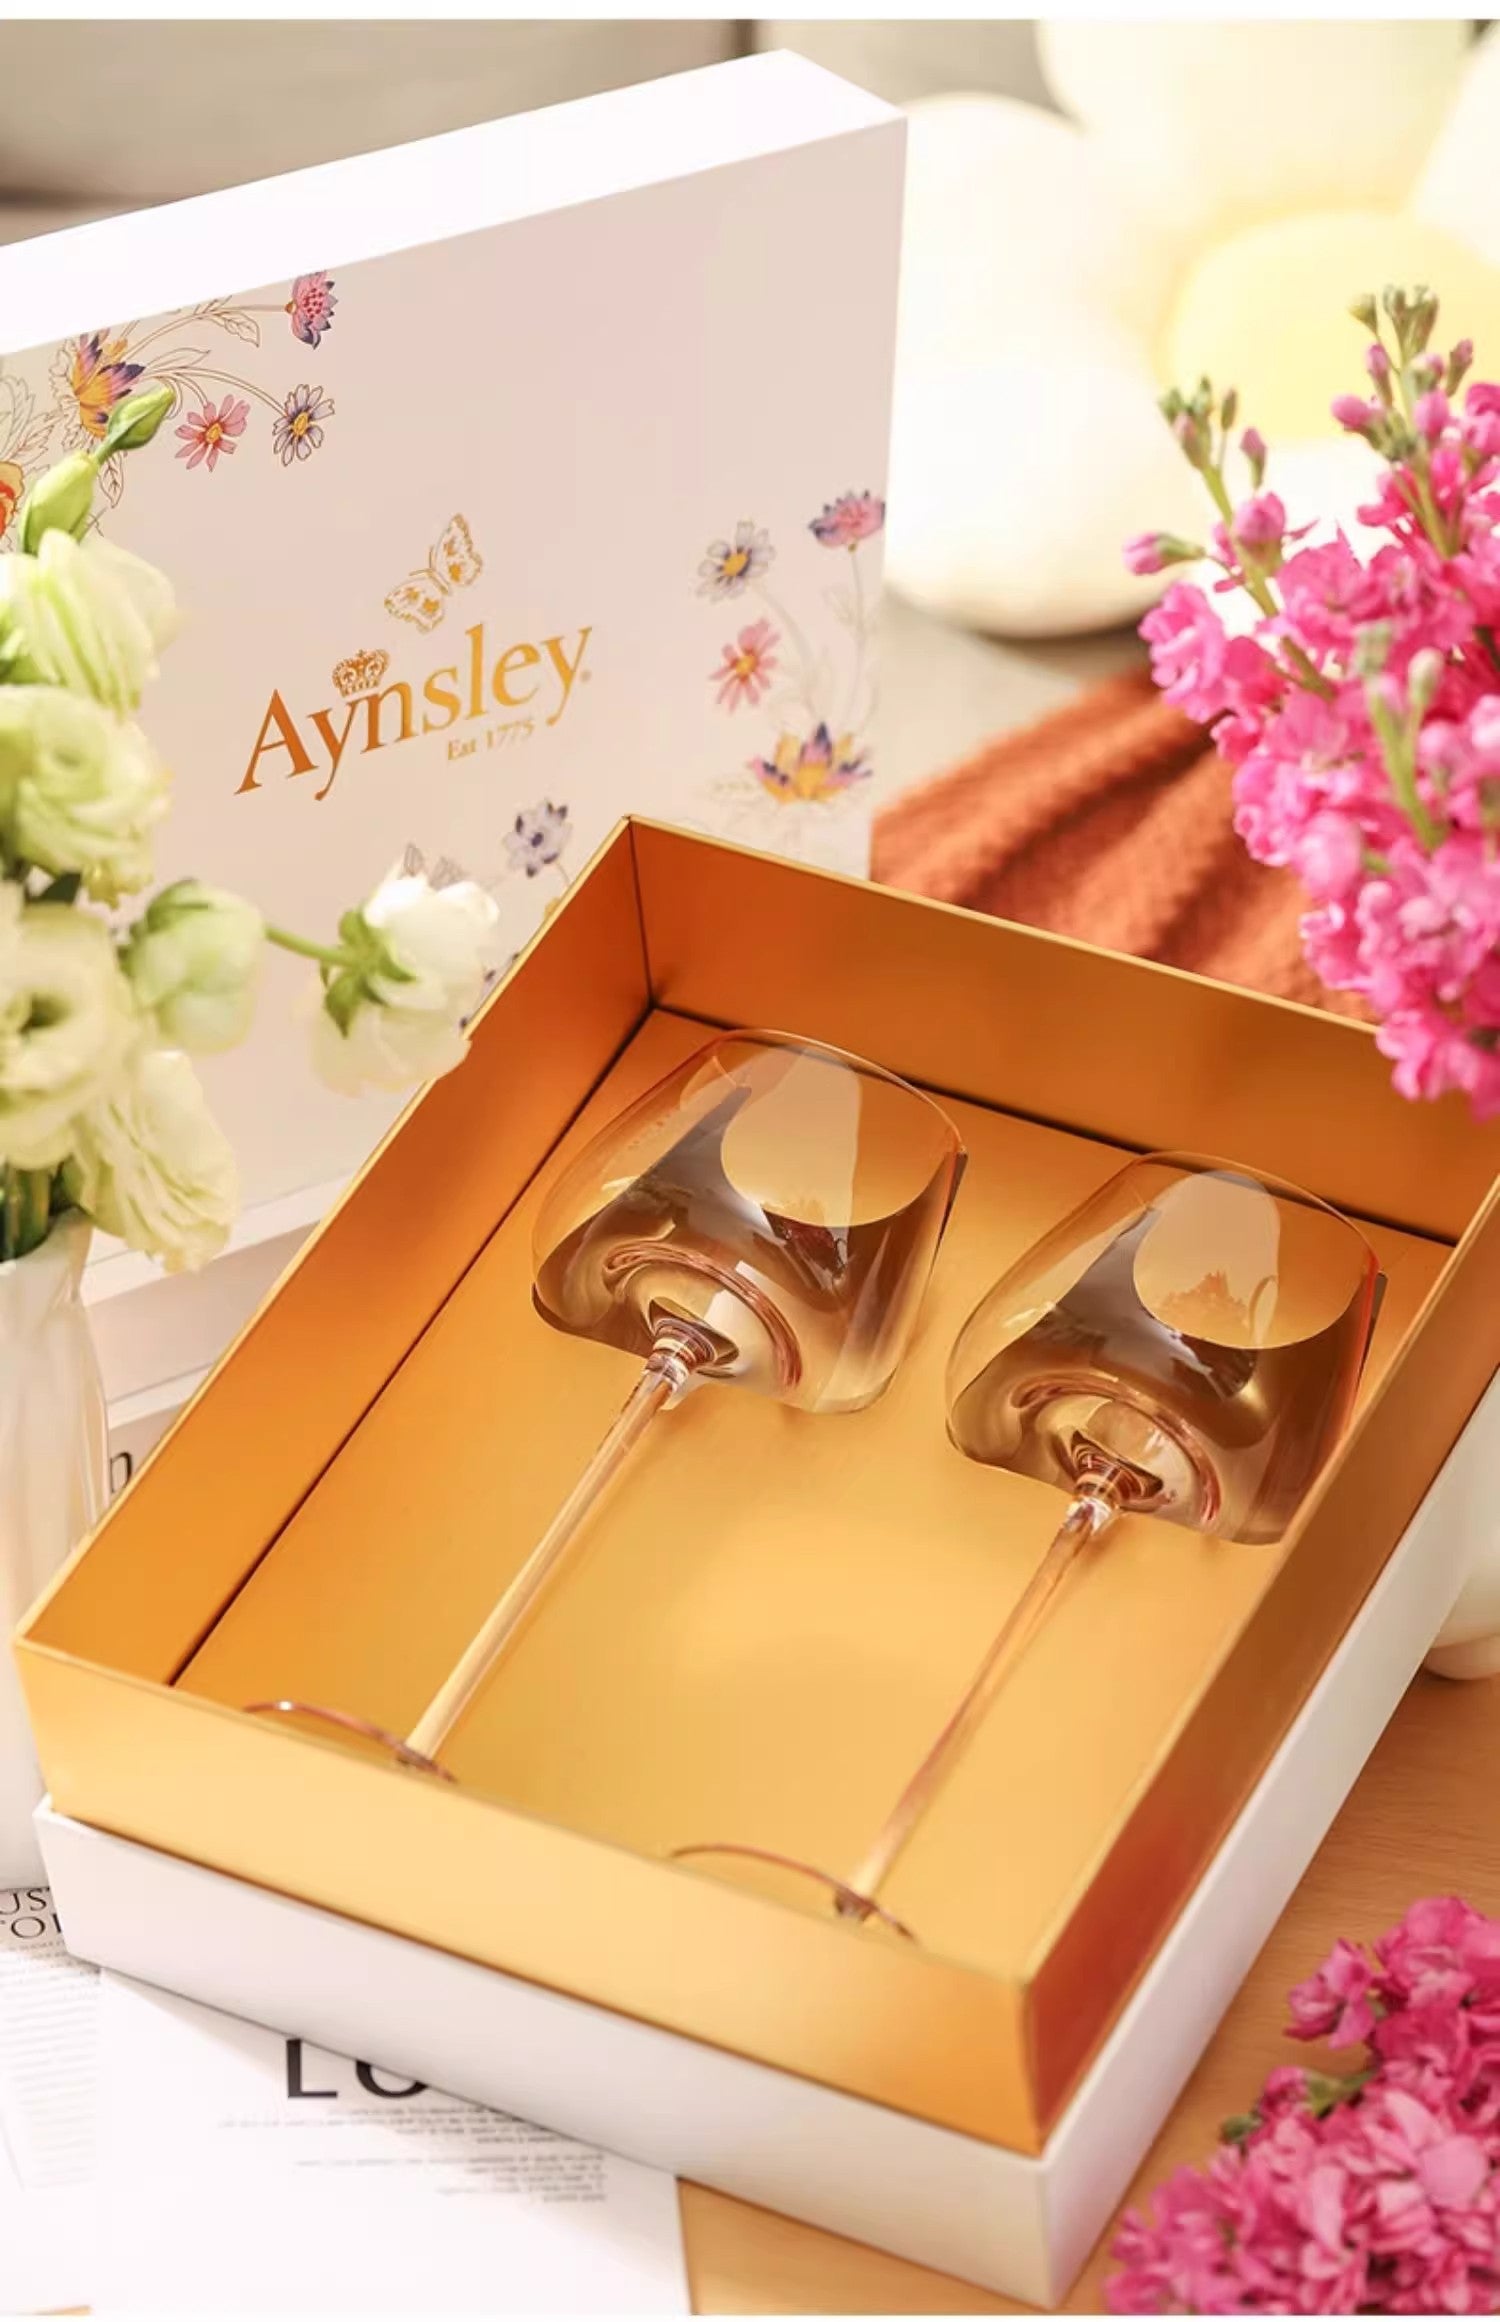 Aynsley Lady Pink Champagne Glasses - Goglasscup